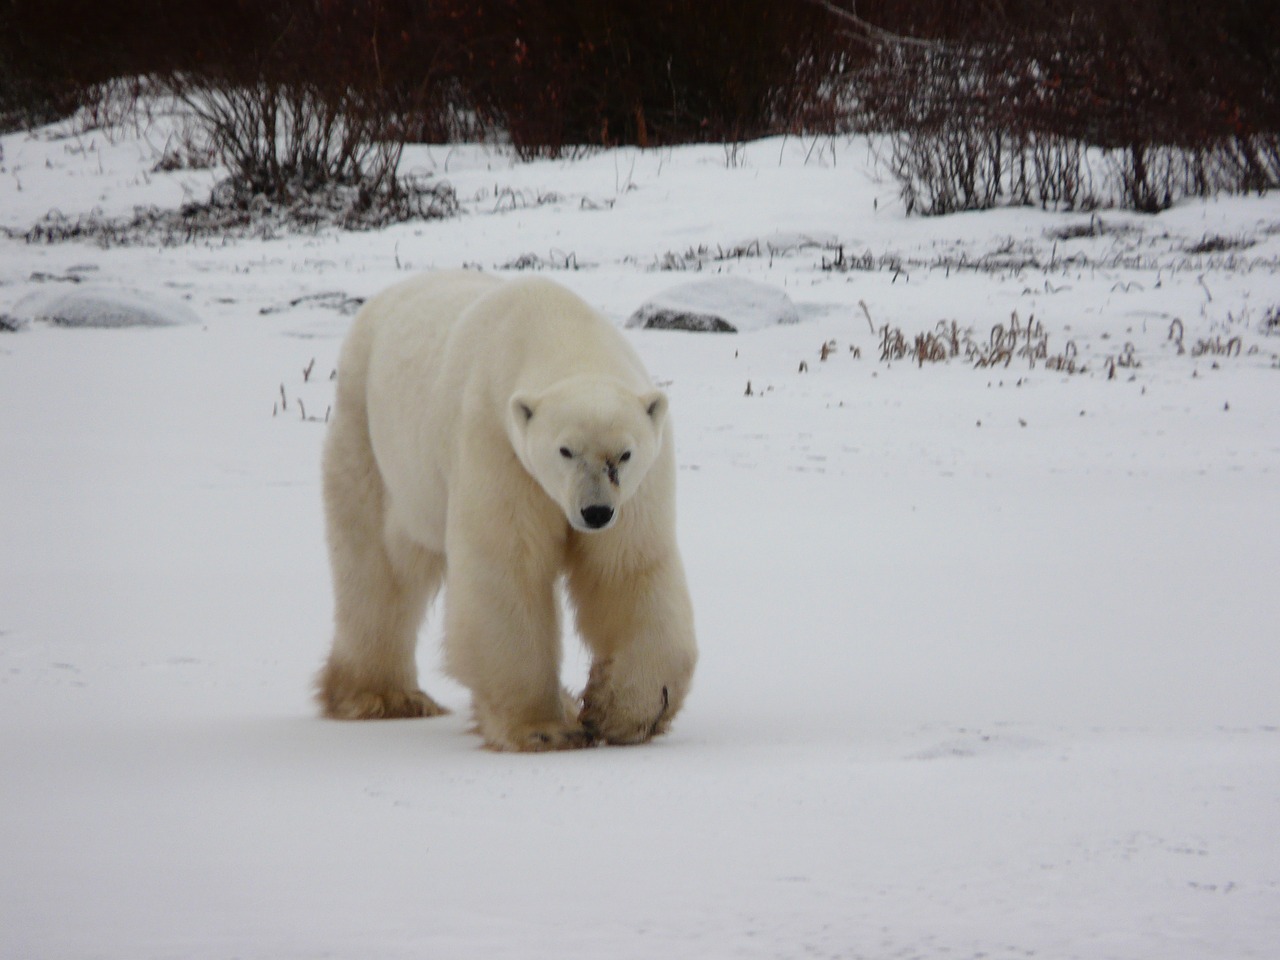 A great Family Vacation Destination that includes Polar Bears? Yes, Please.